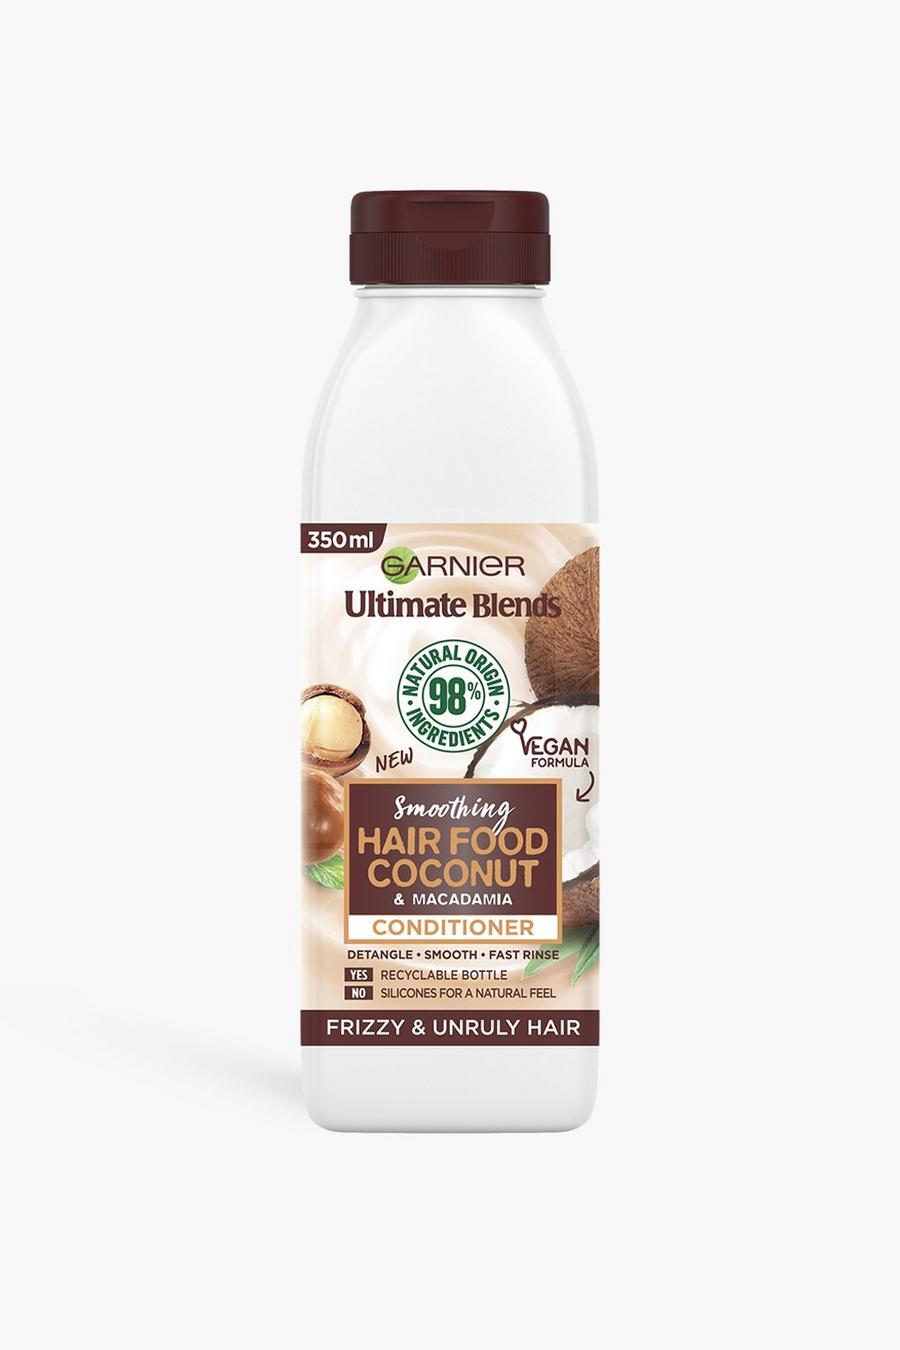 Brown marrone Garnier Ultimate Blends Smoothing Hair Food Coconut Conditioner For Frizzy Hair 350ml